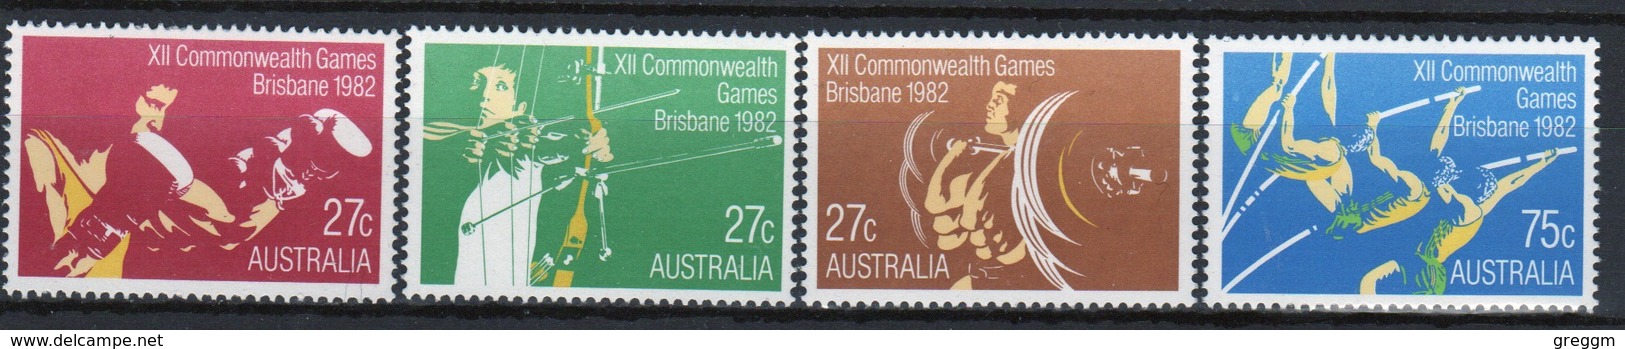 Australia 1982 Set Of Stamps To Celebrate Commonwealth Games. - Mint Stamps